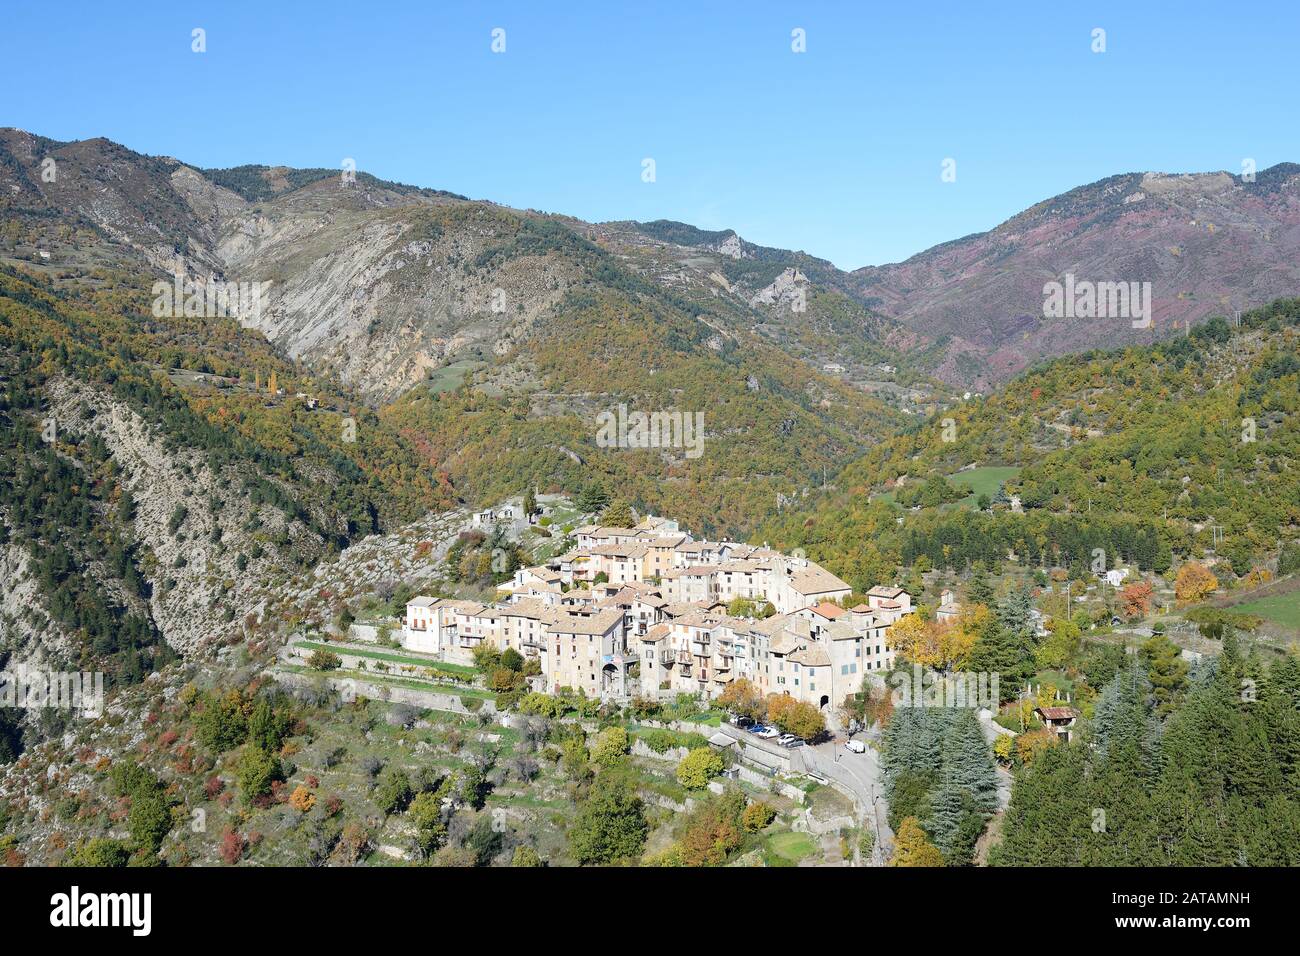 AERIAL VIEW. Picturesque isolated hilltop village in the fall. La Croix-sur-Roudoule, French Riviera's backcountry, France. Stock Photo